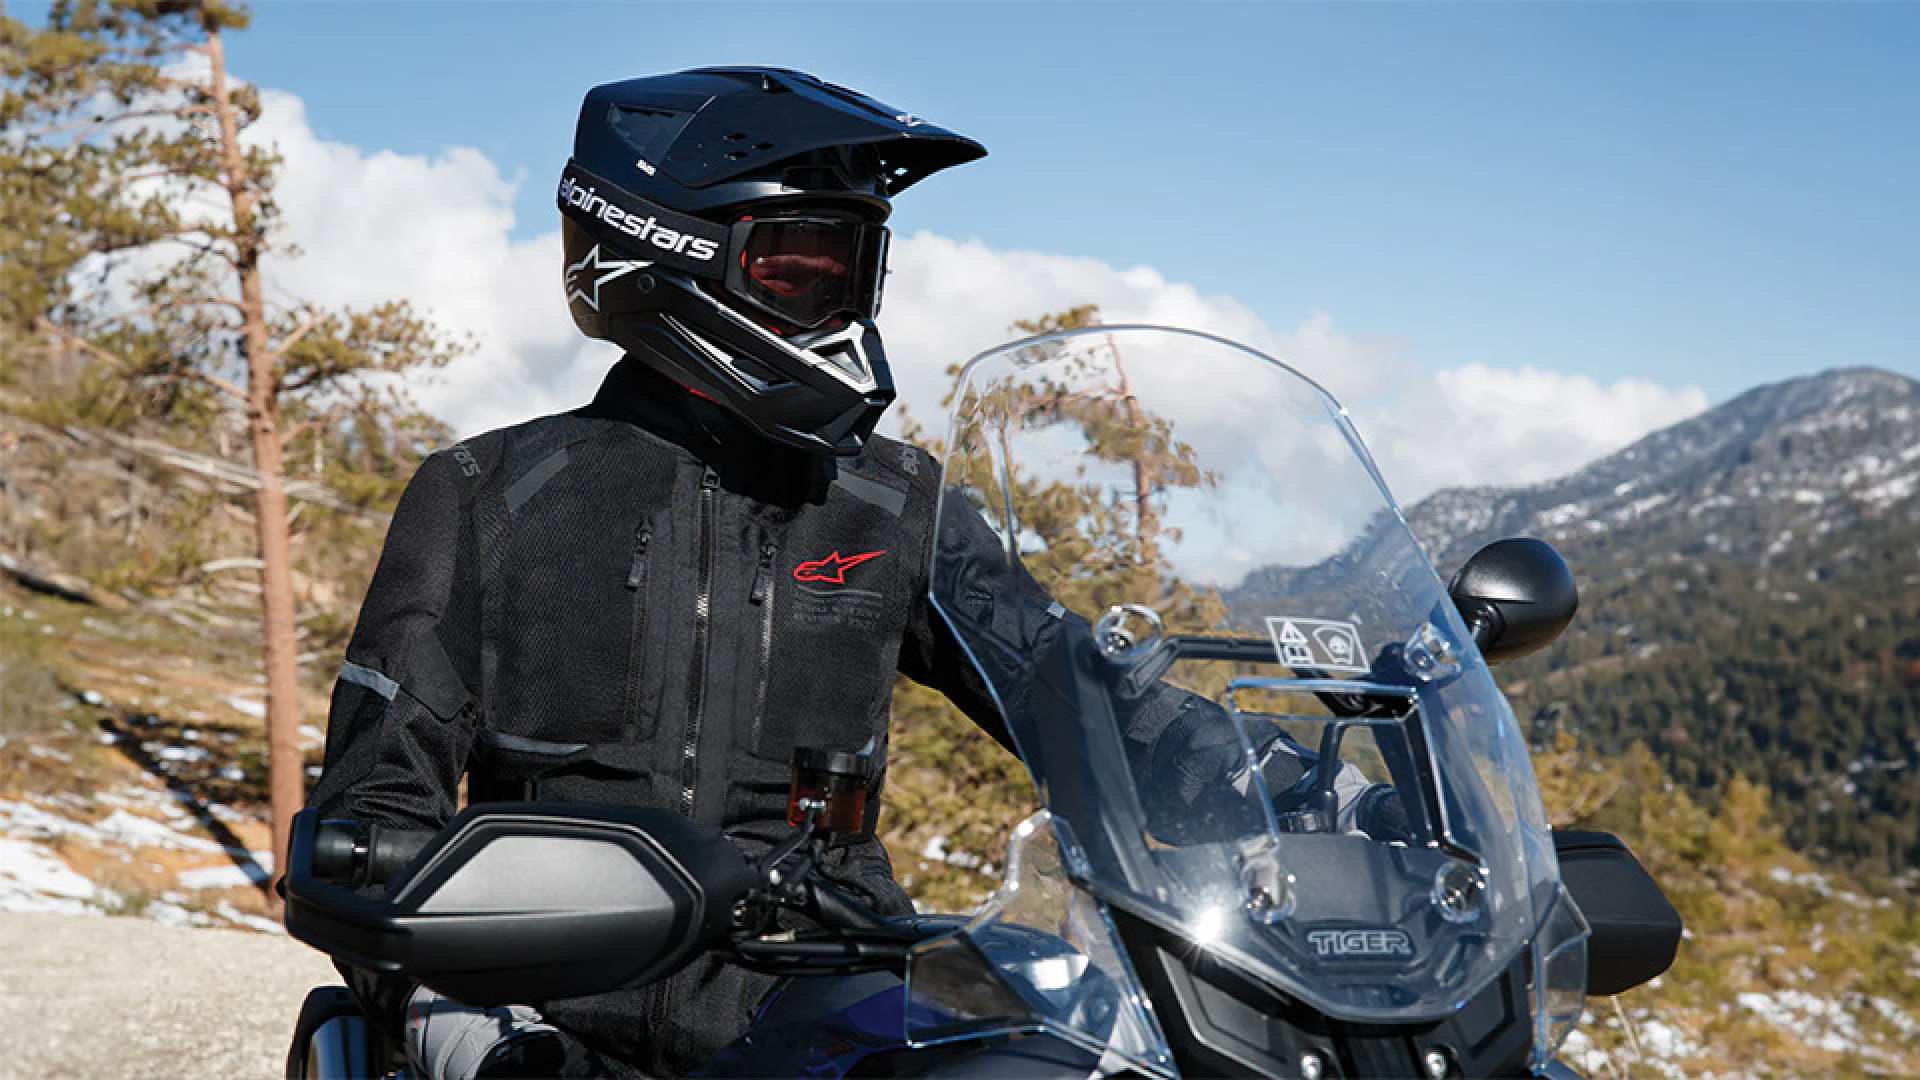 https://www.raceleathers.co.uk/image/cache/catalog/Blog%20Images/Alpinestars%20Andes%20Air%20Drystar%20Motorcycle%20Jacket%20Product%20Review-1920x1080.jpg